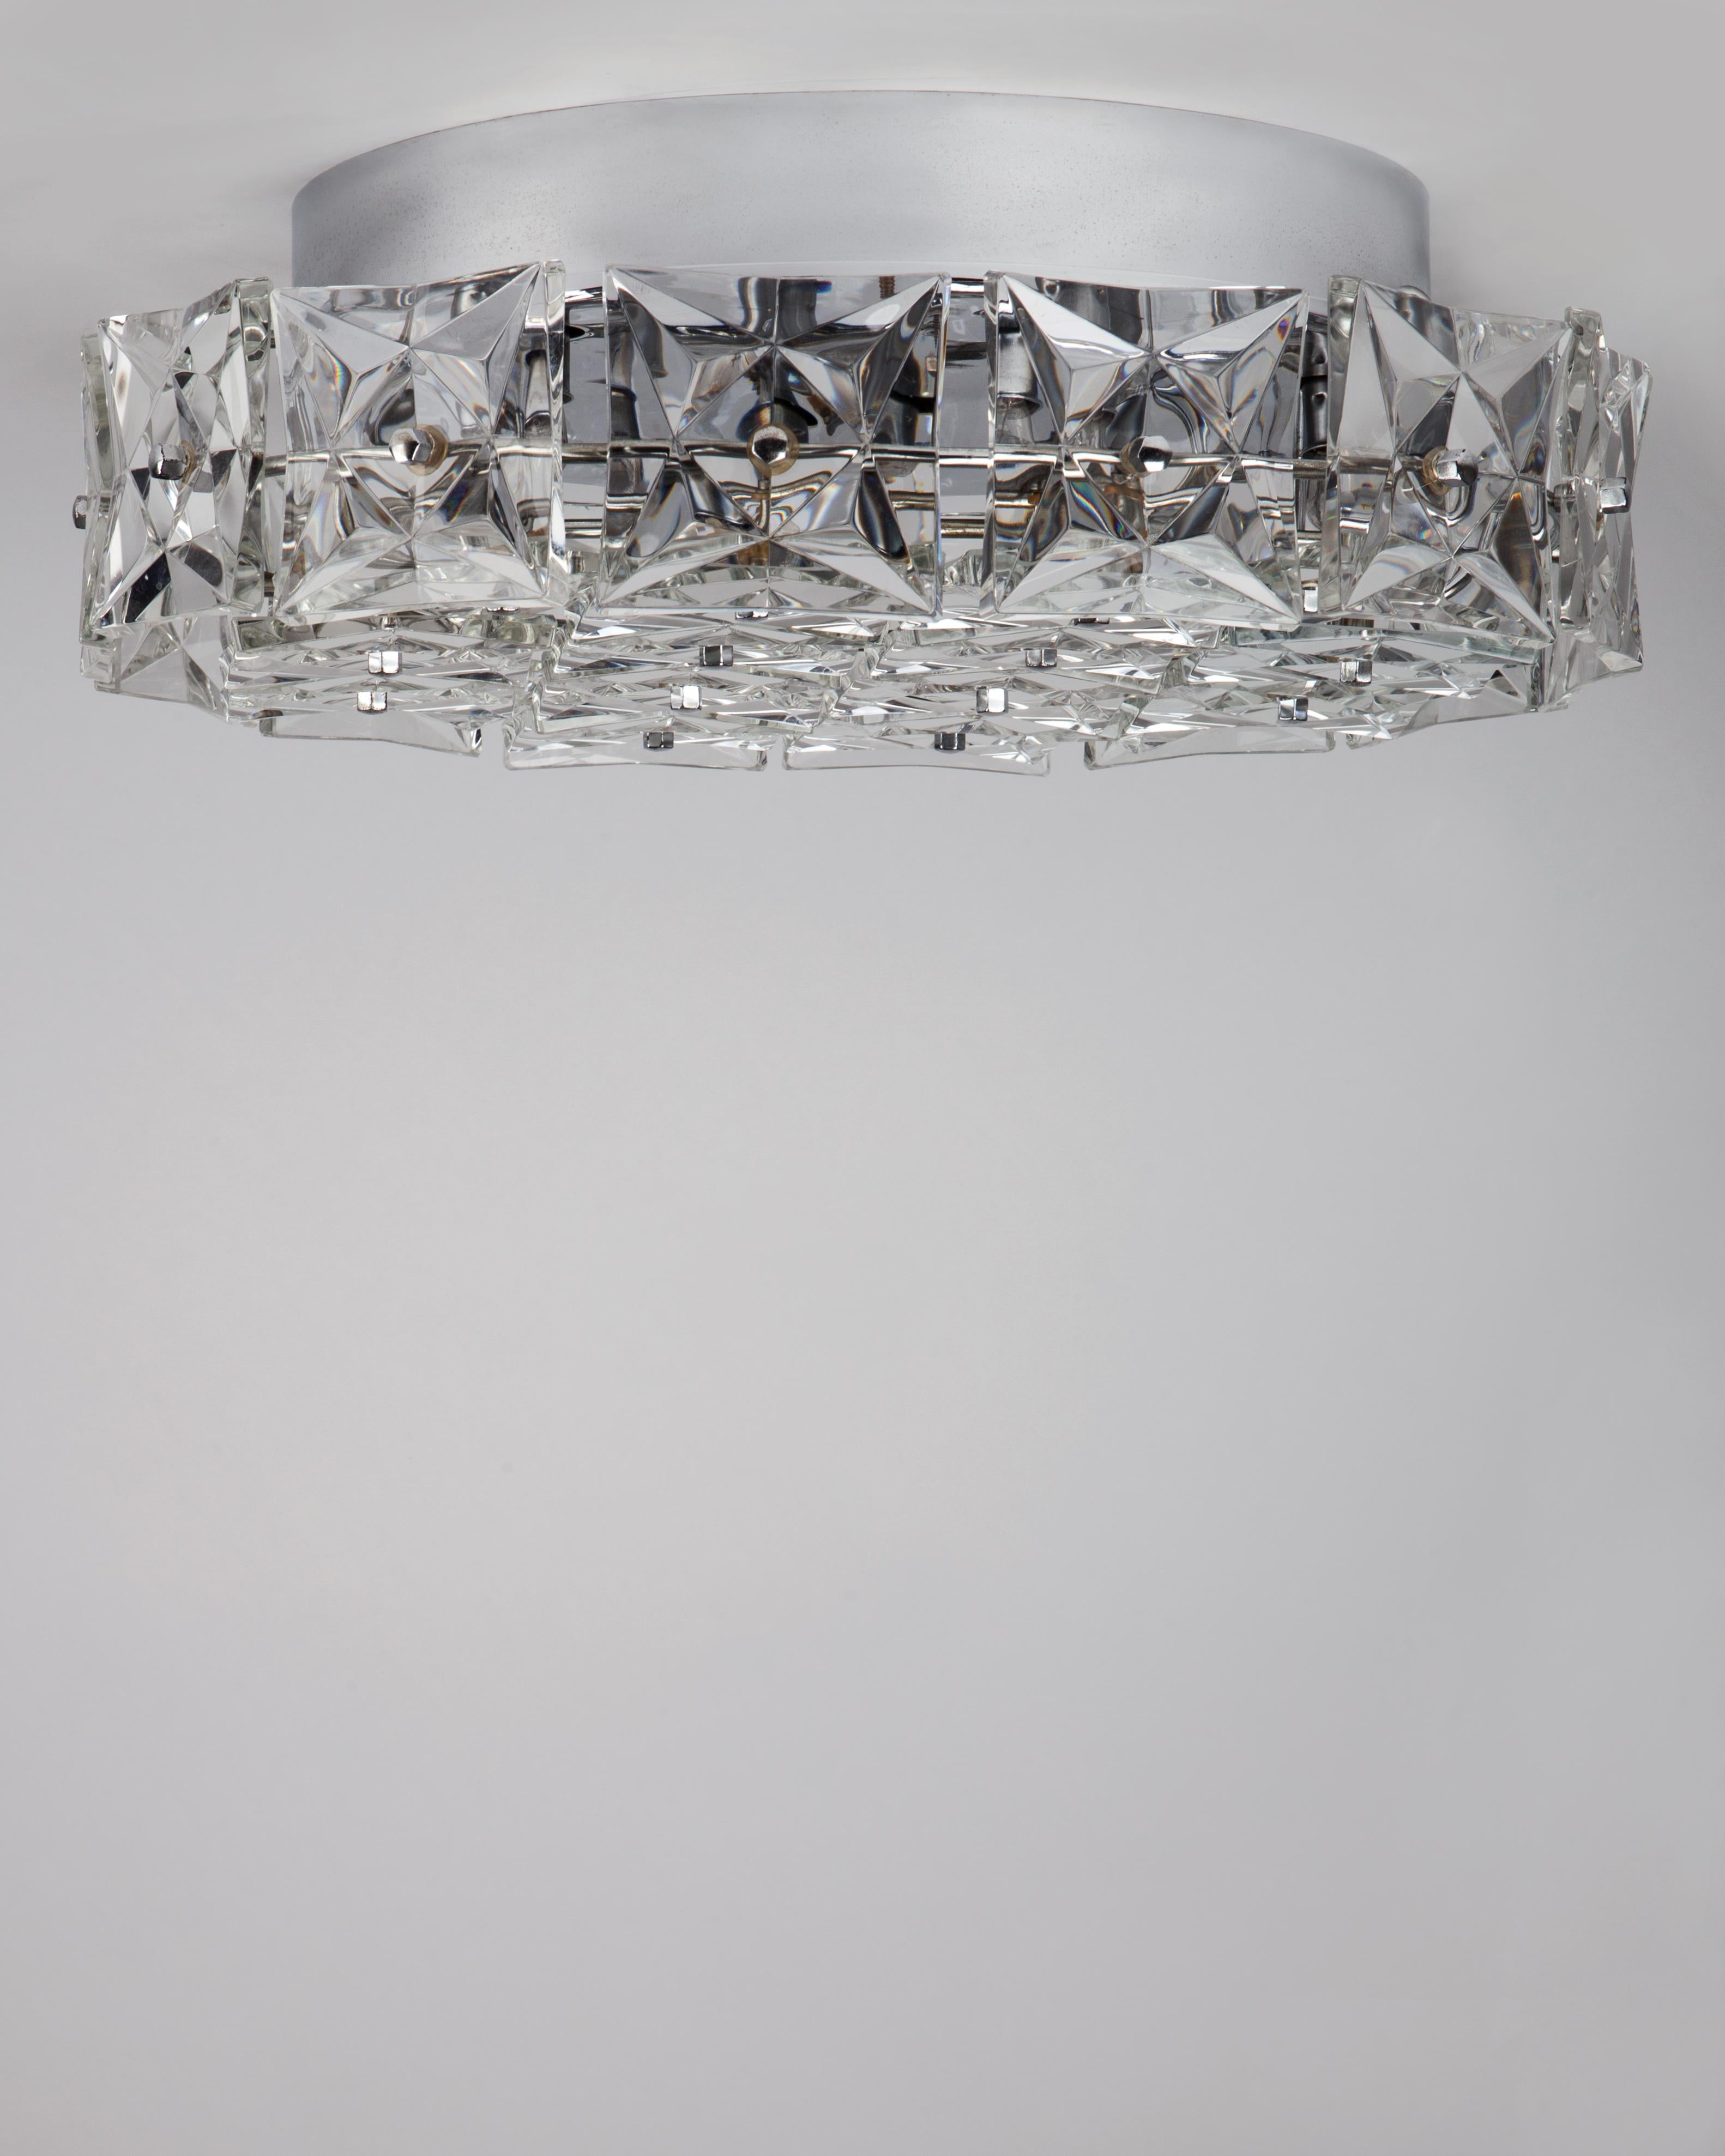 AHL4055
A vintage Mid-Century flush mount with squares of thick clear faceted glass held on a round frame in its original chrome finish. Signed by the Austrian maker Kinkeldey. Due to the antique nature of this fixture, there may be some nicks or